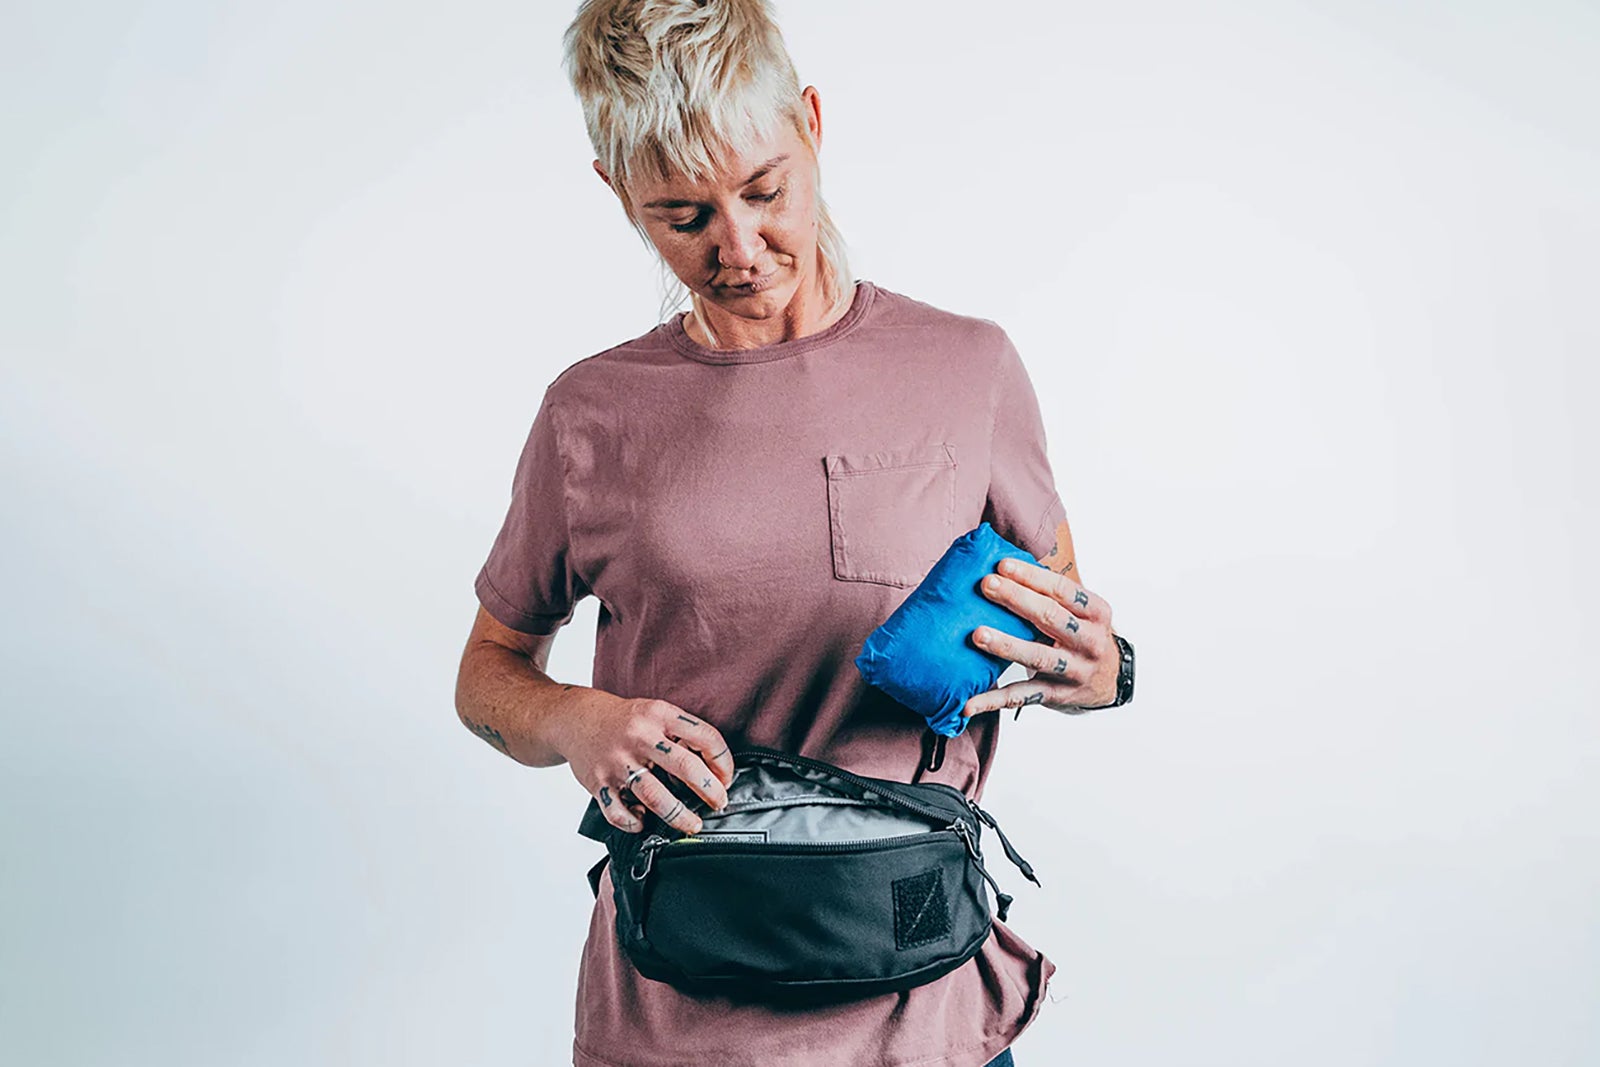 11 Best Fanny Packs in 2022: Comfy, Stylish, Hands-Free Options